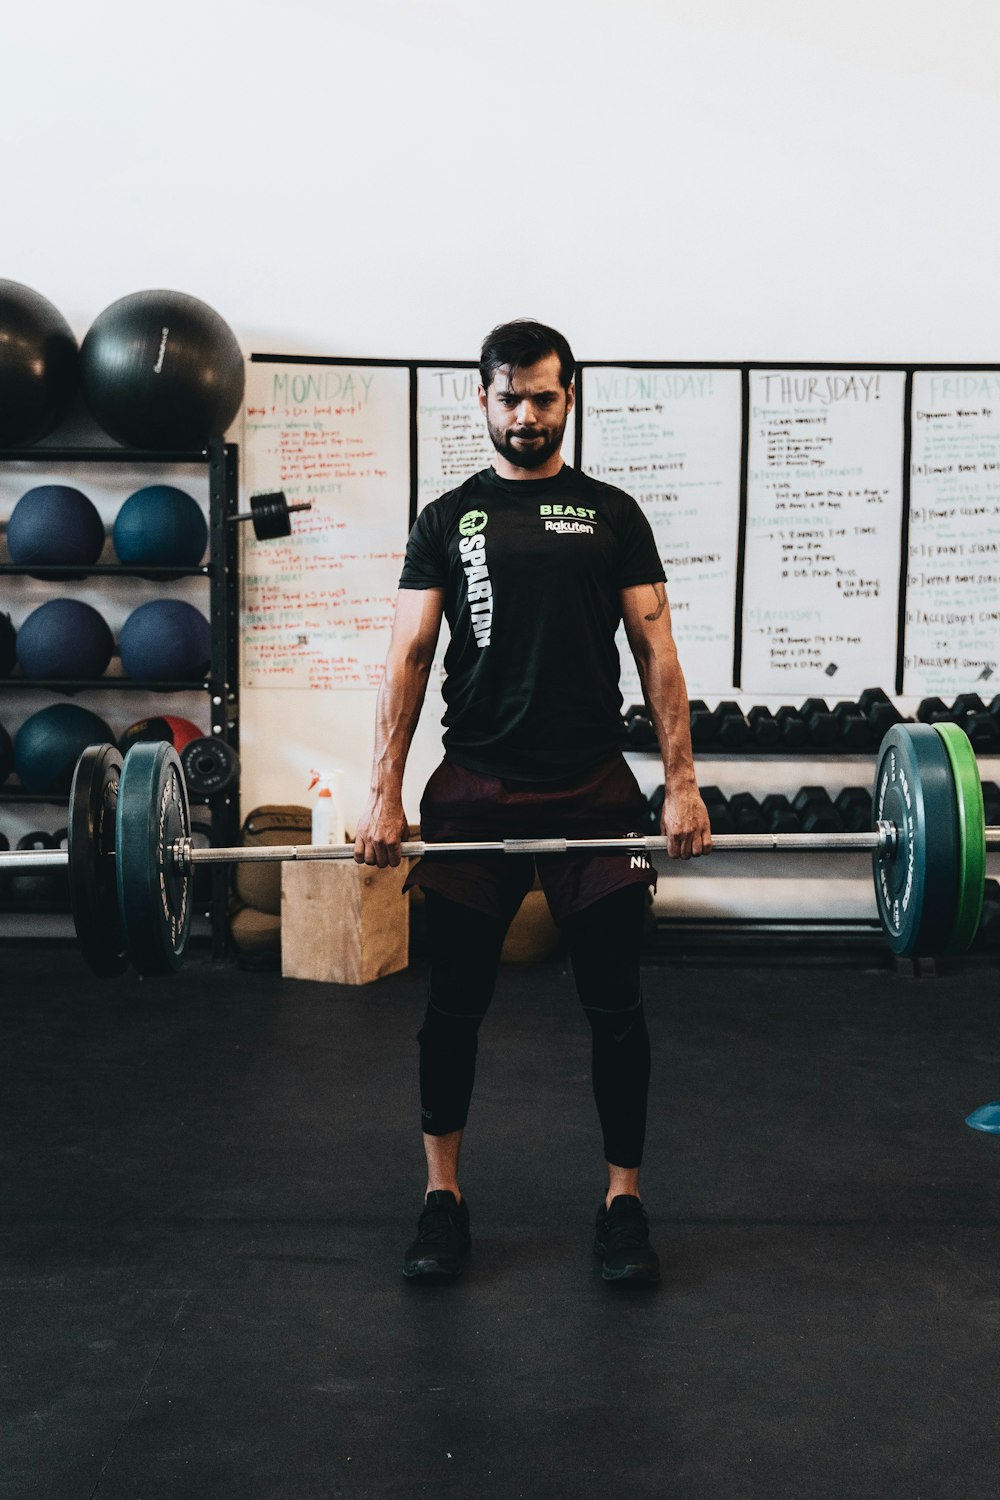 man in black crew neck t-shirt and black shorts carrying barbell